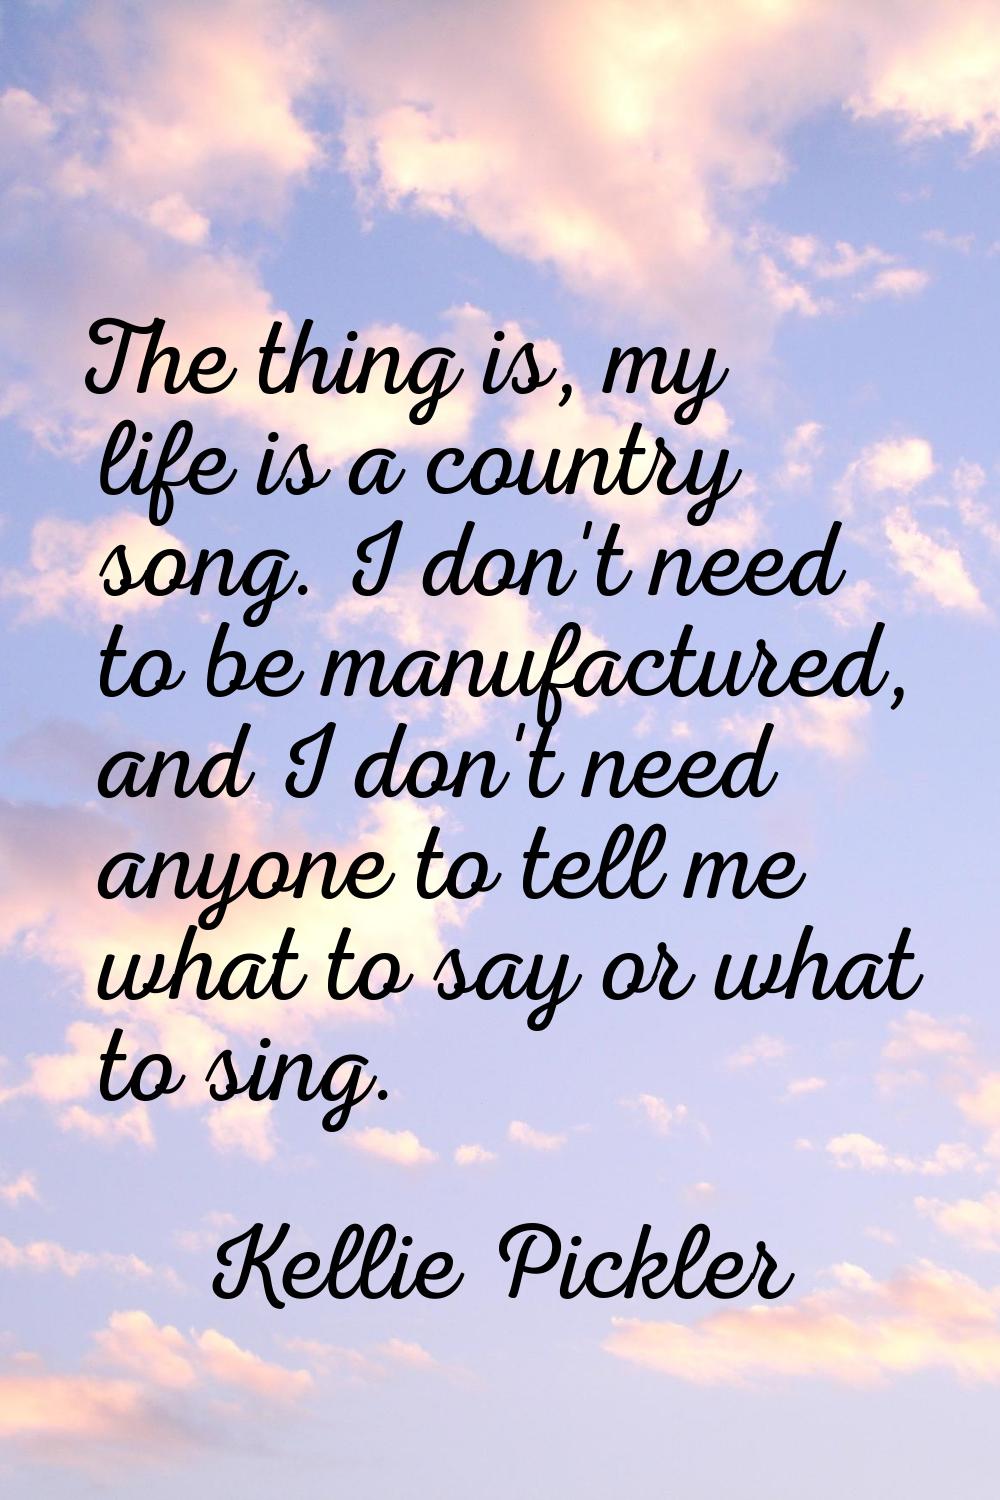 The thing is, my life is a country song. I don't need to be manufactured, and I don't need anyone t